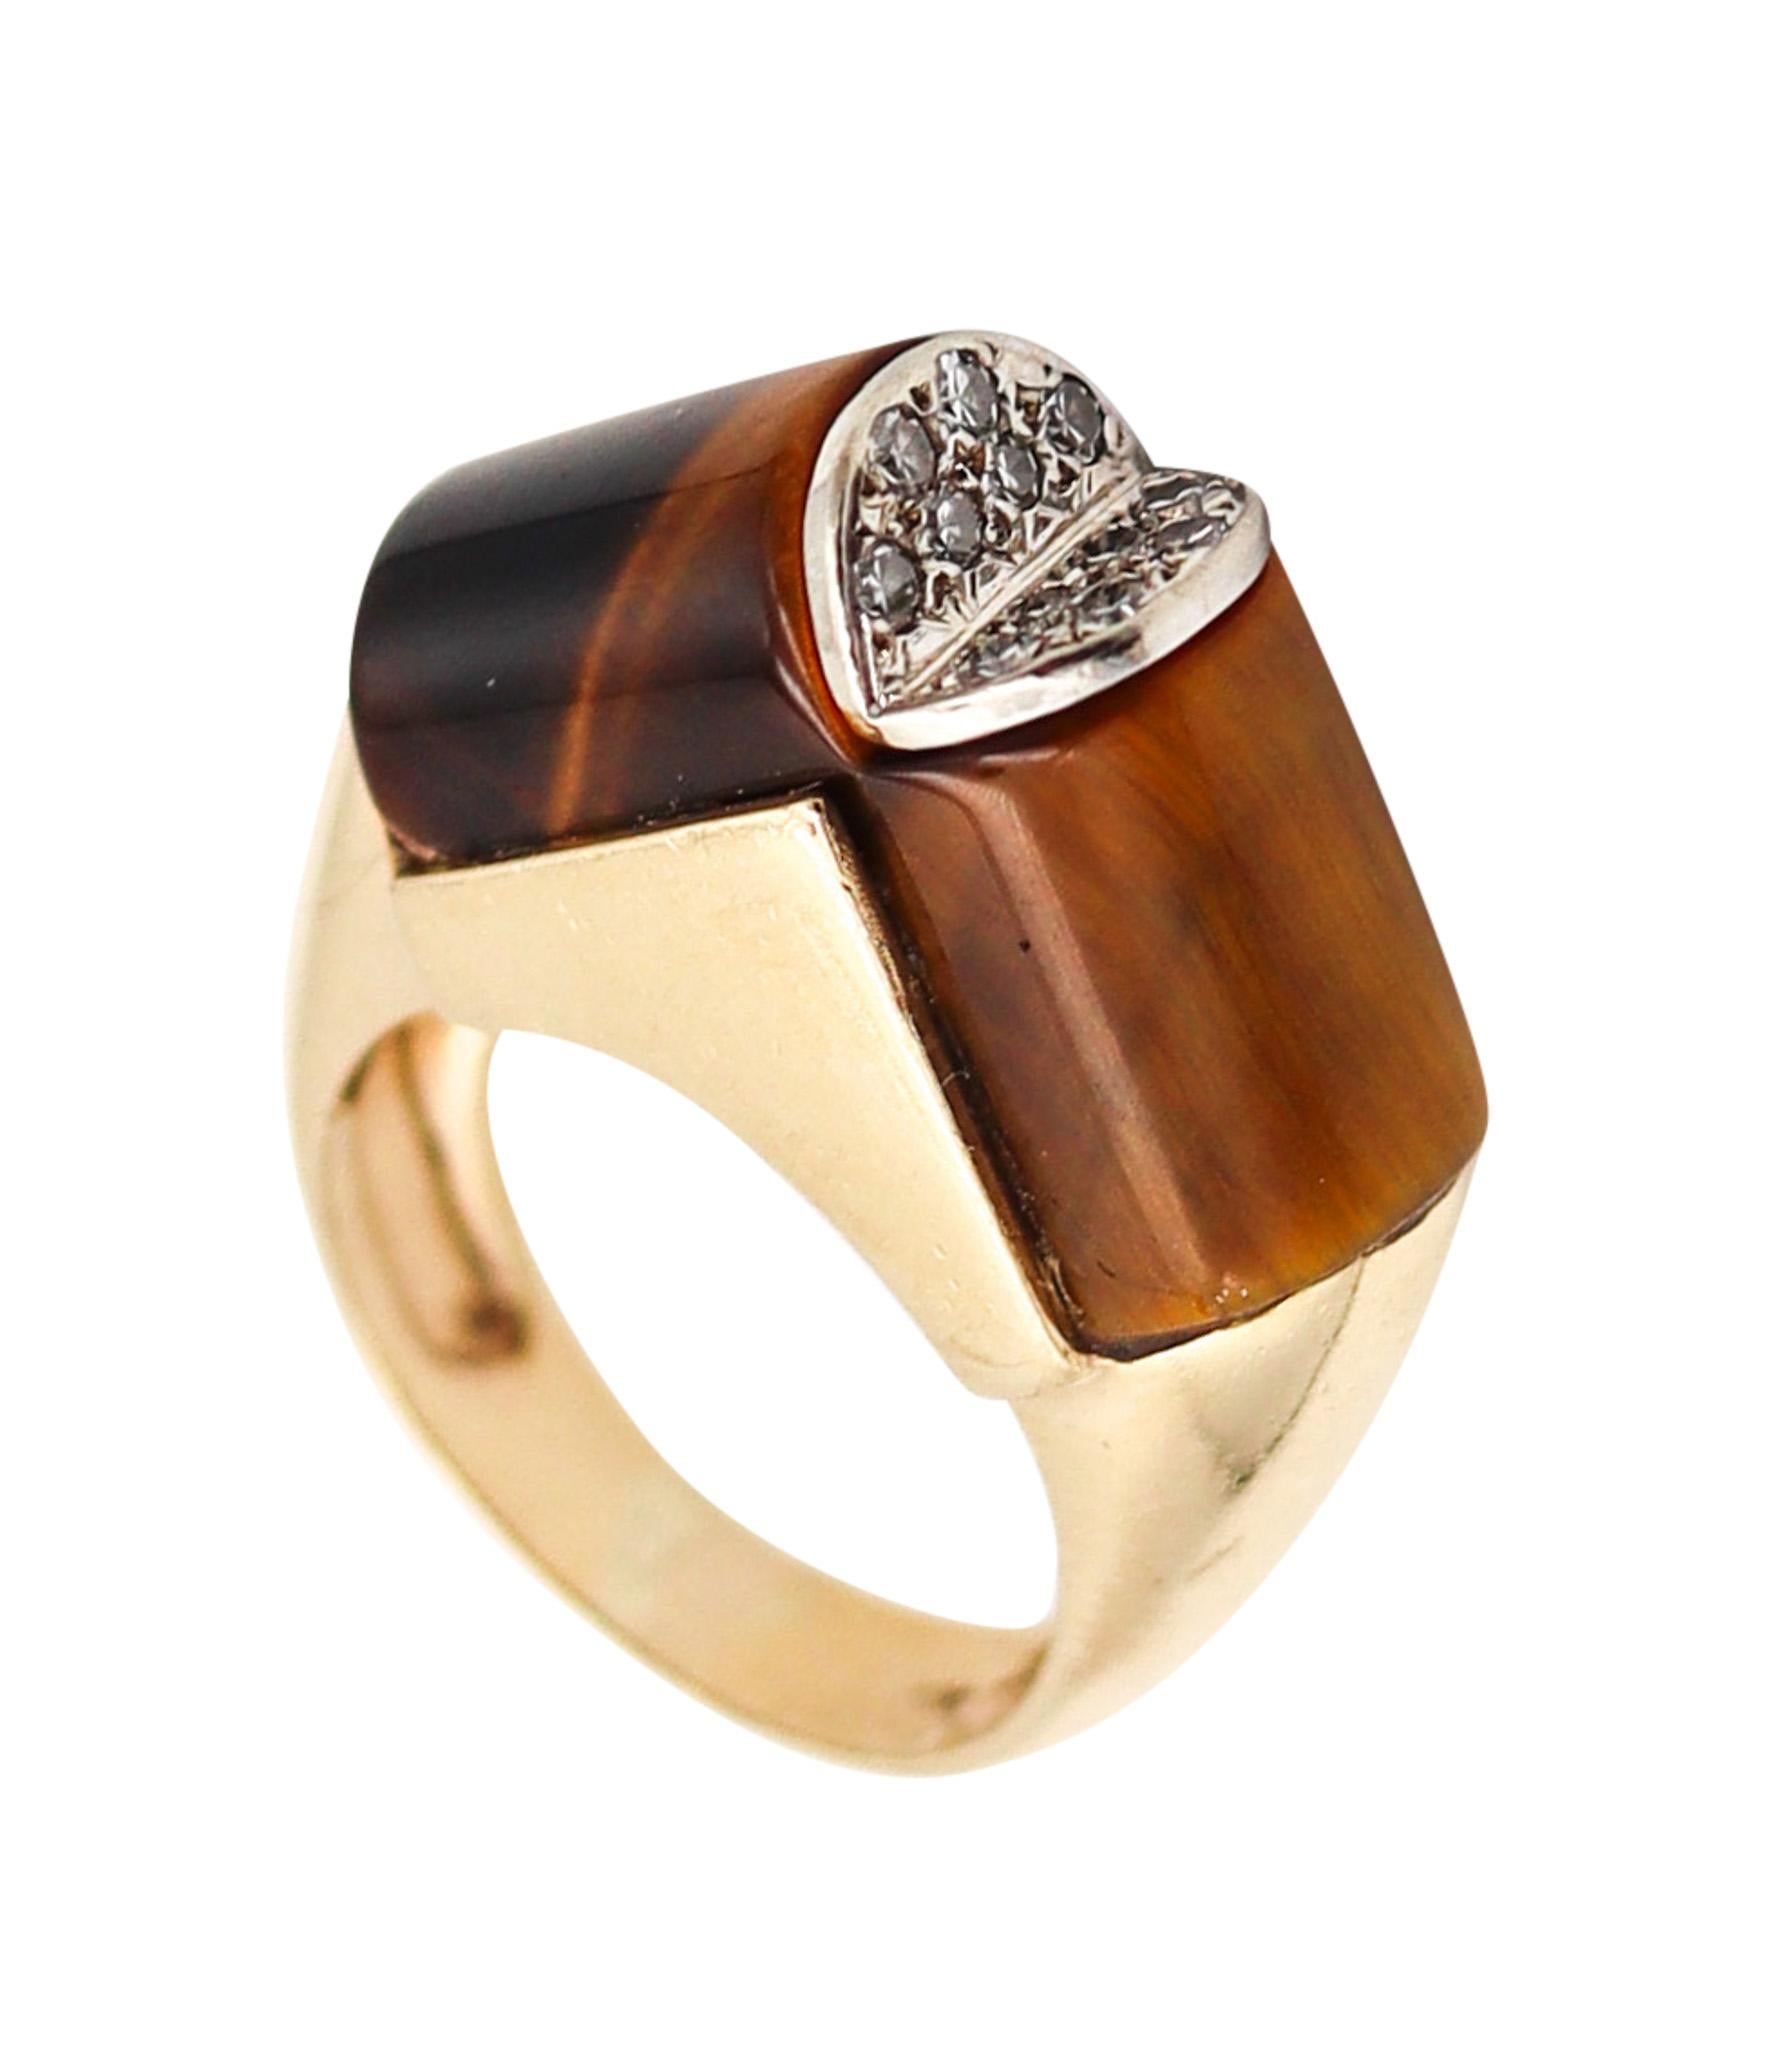 Modernist 1960 Sculptural Geometric Ring In 14Kt Gold With Diamonds & Tiger Eye For Sale